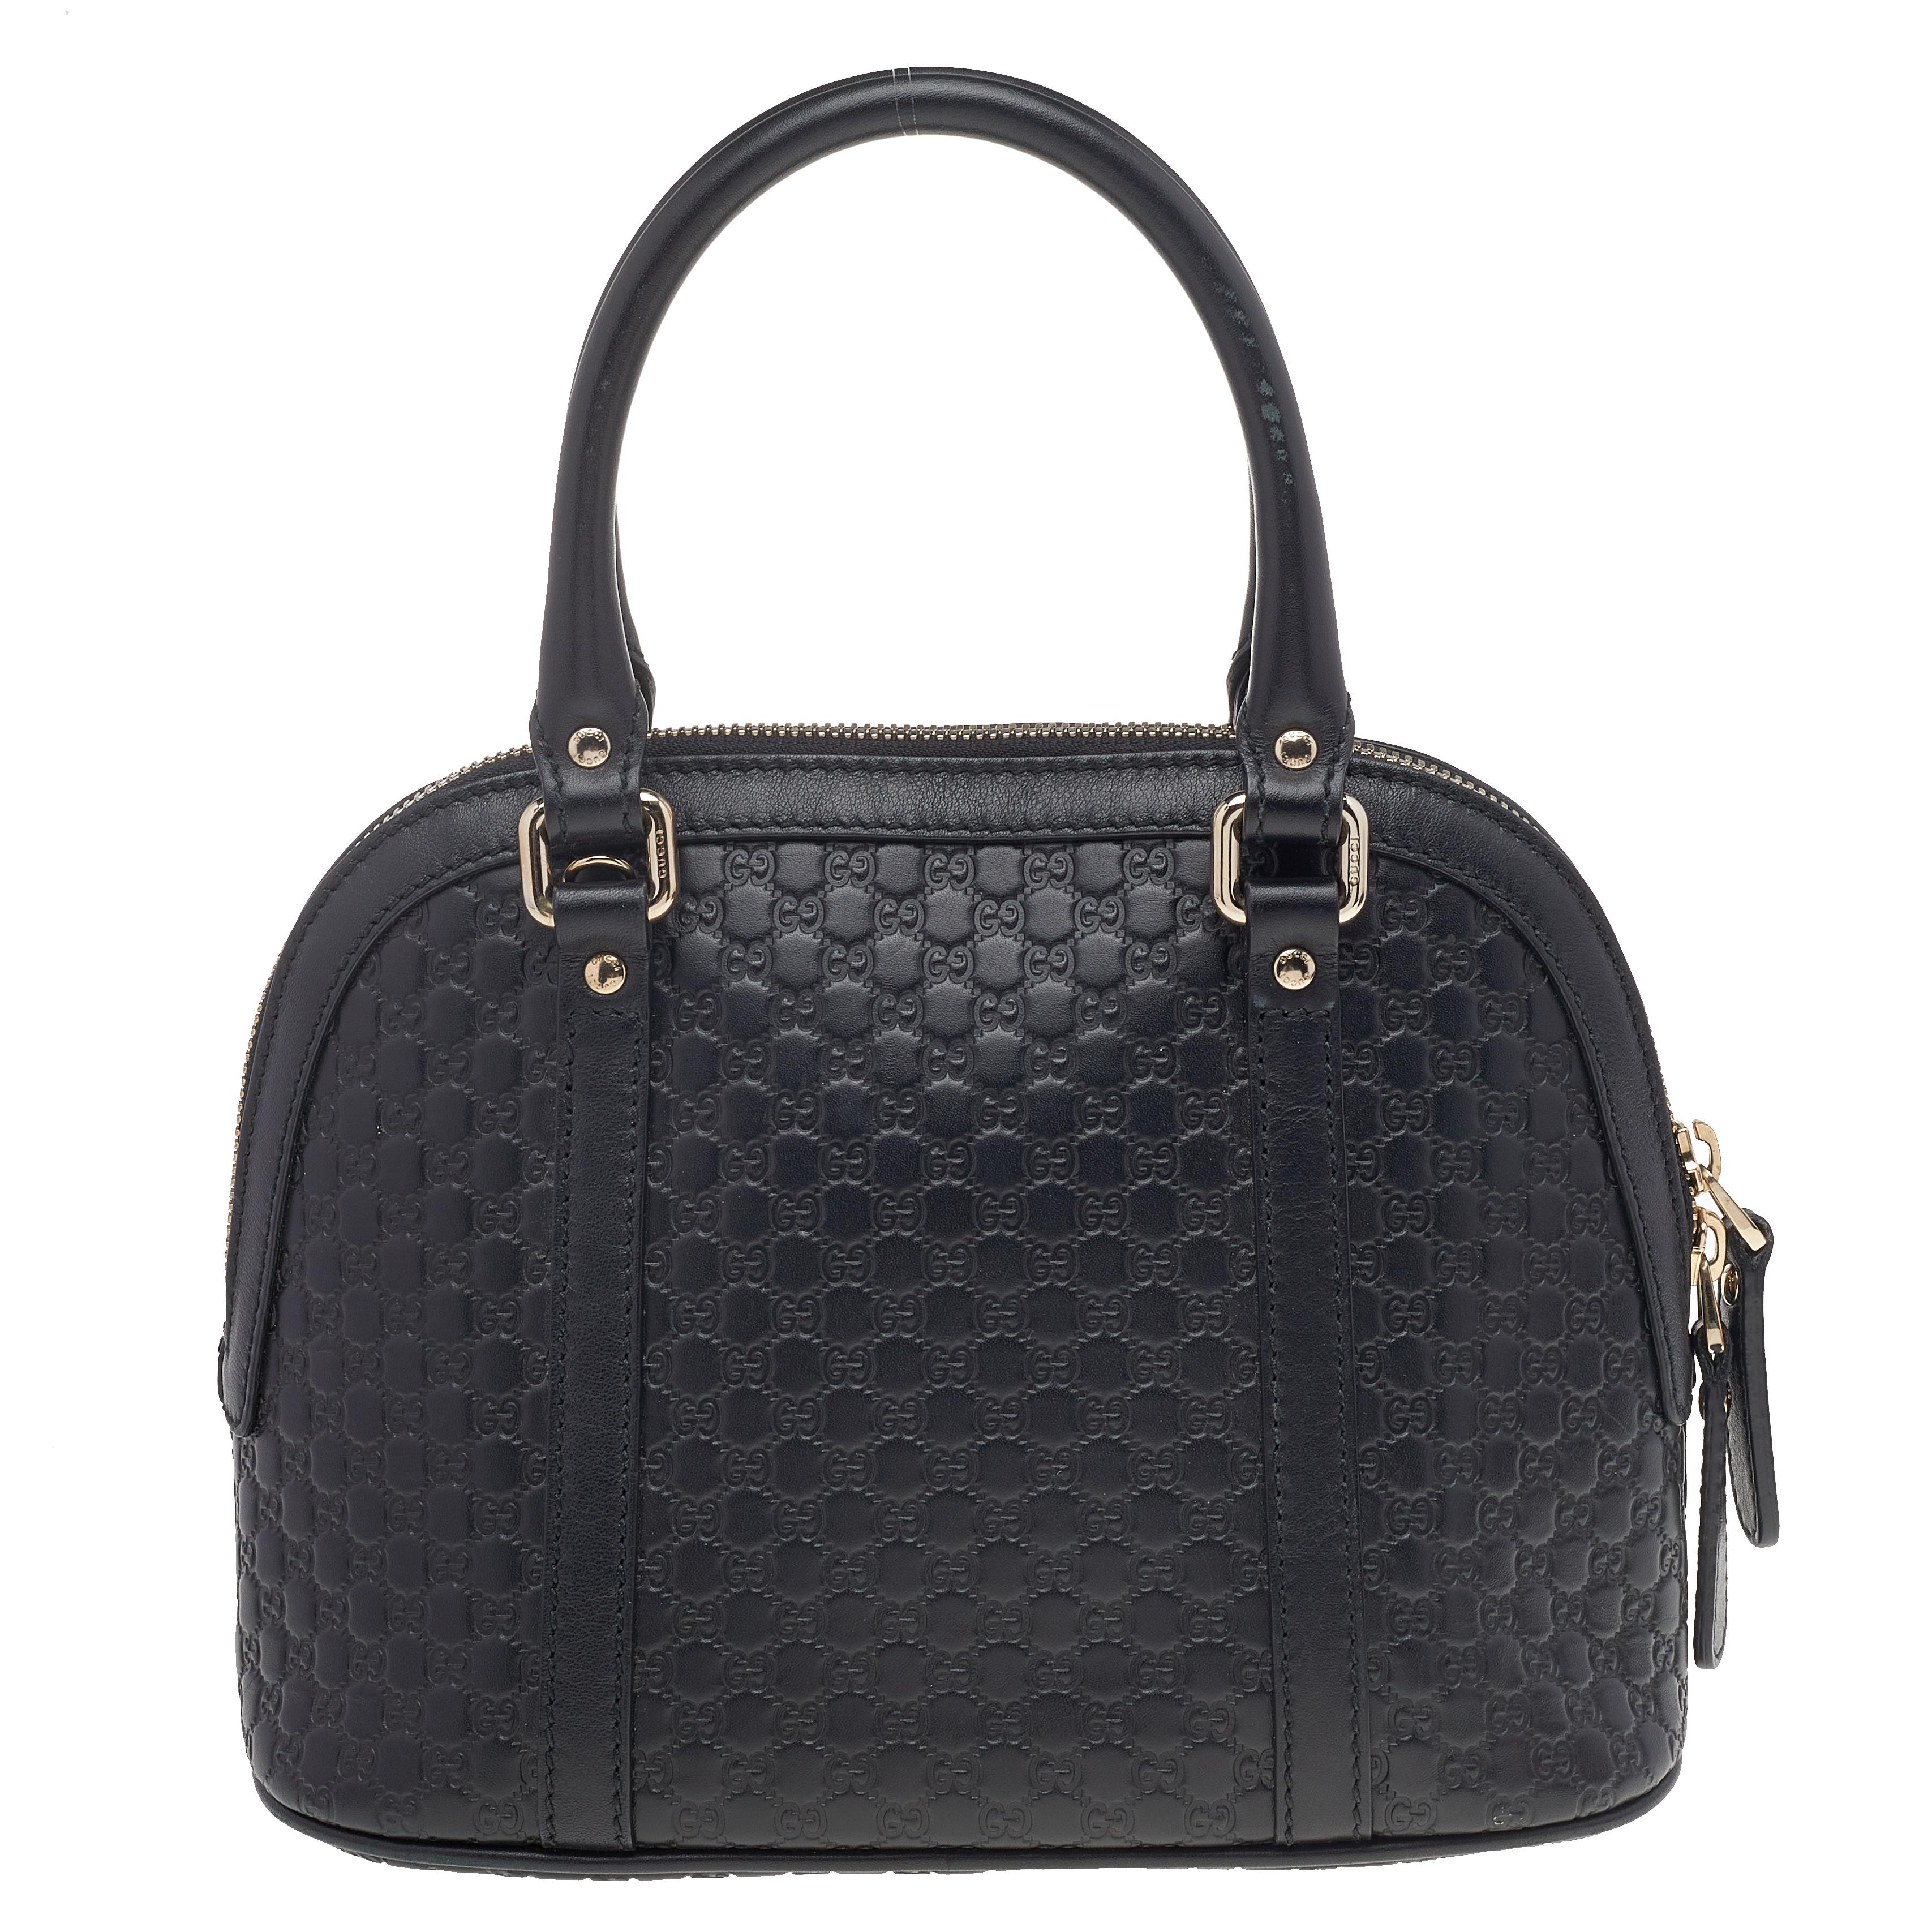 Acquire a smart look wearing this Mini Dome bag that has come from the house of Gucci. Its black color exudes a subtle vibe, and Microguccissima leather speaks out for grace and softness. The versatility lies in the dual-rolled handles and long